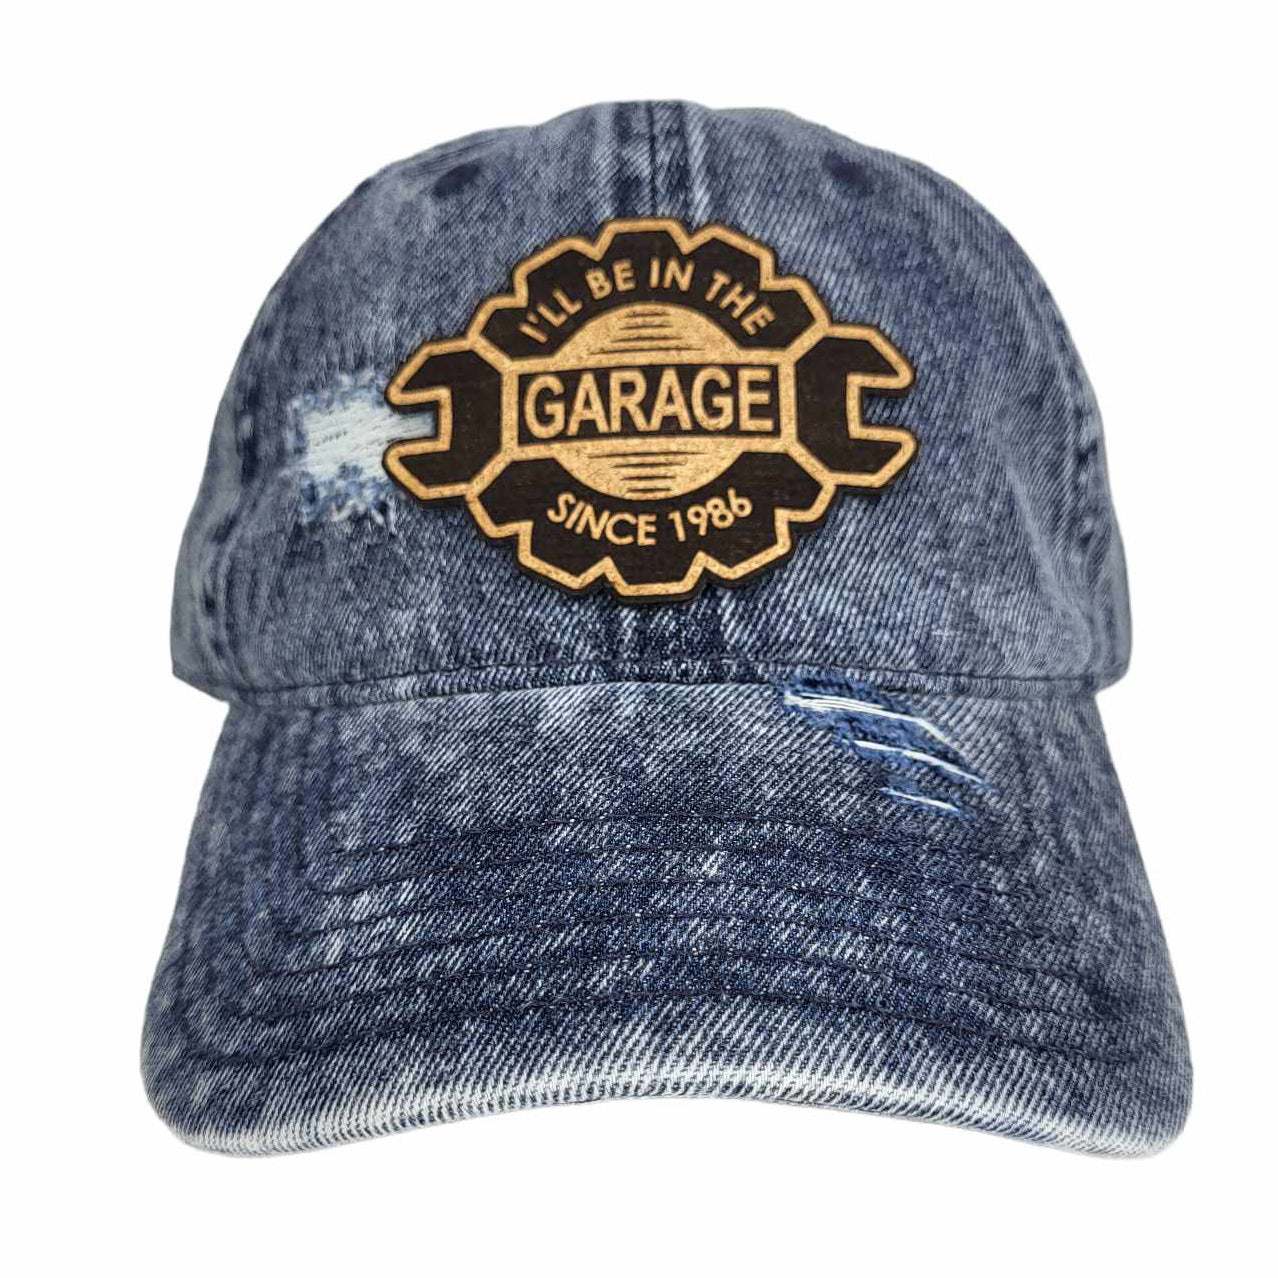 I'll Be In The Garage Hat Hat